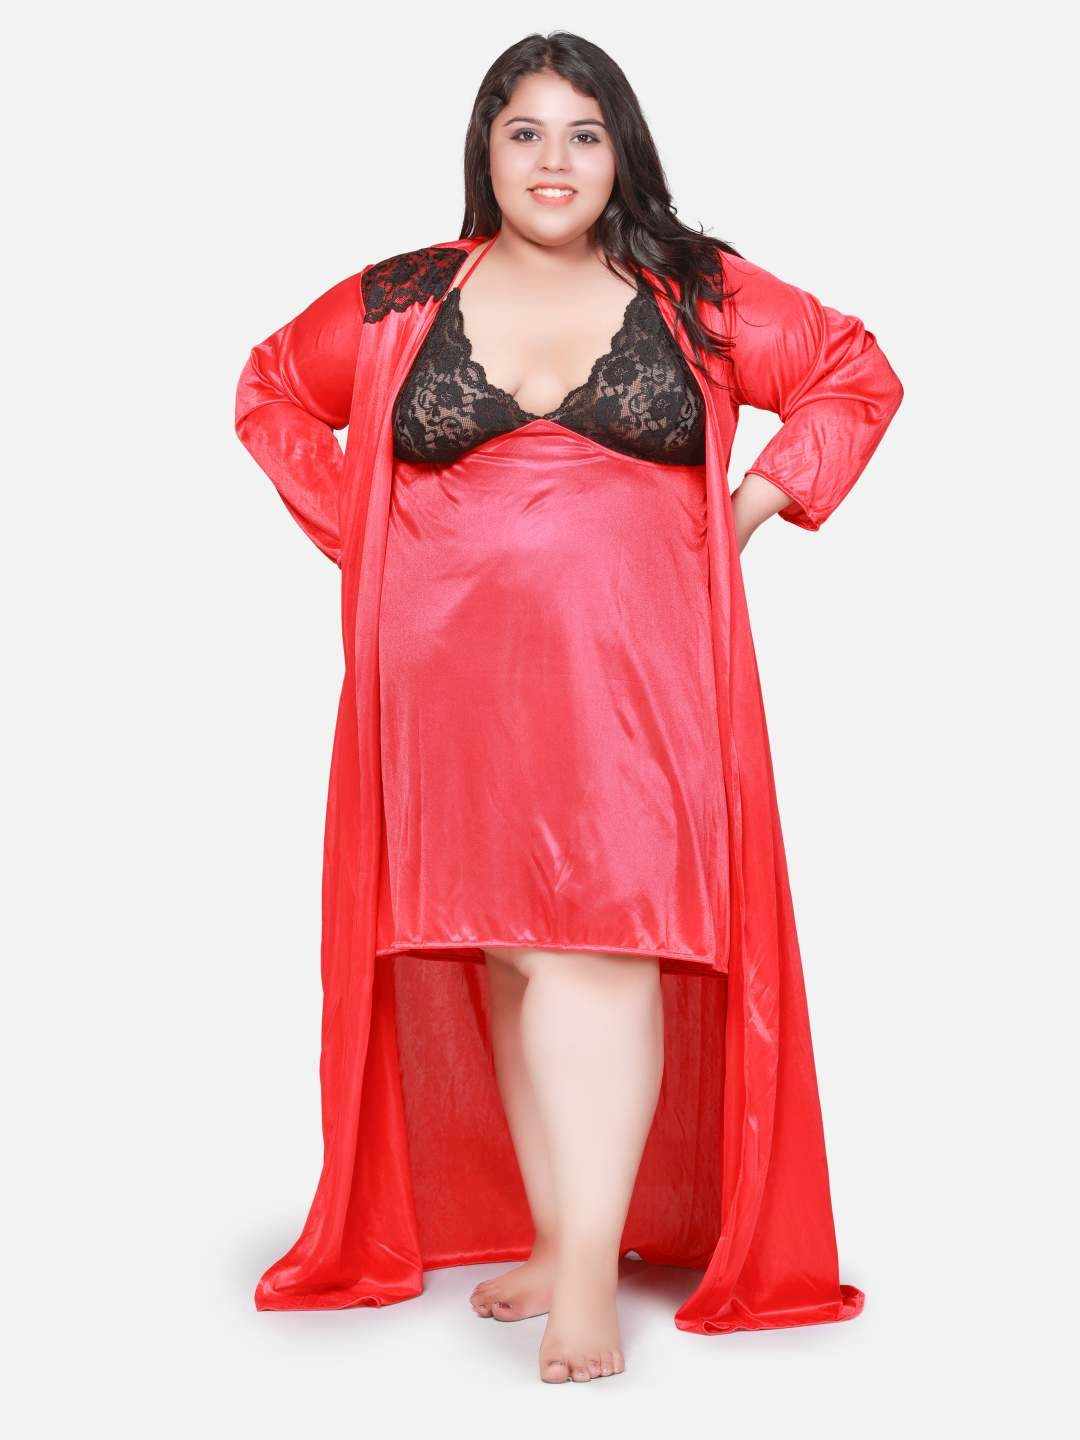 Plus Size Hot Two Piece Red Babydoll Night Dress for Honeymoon BB301C